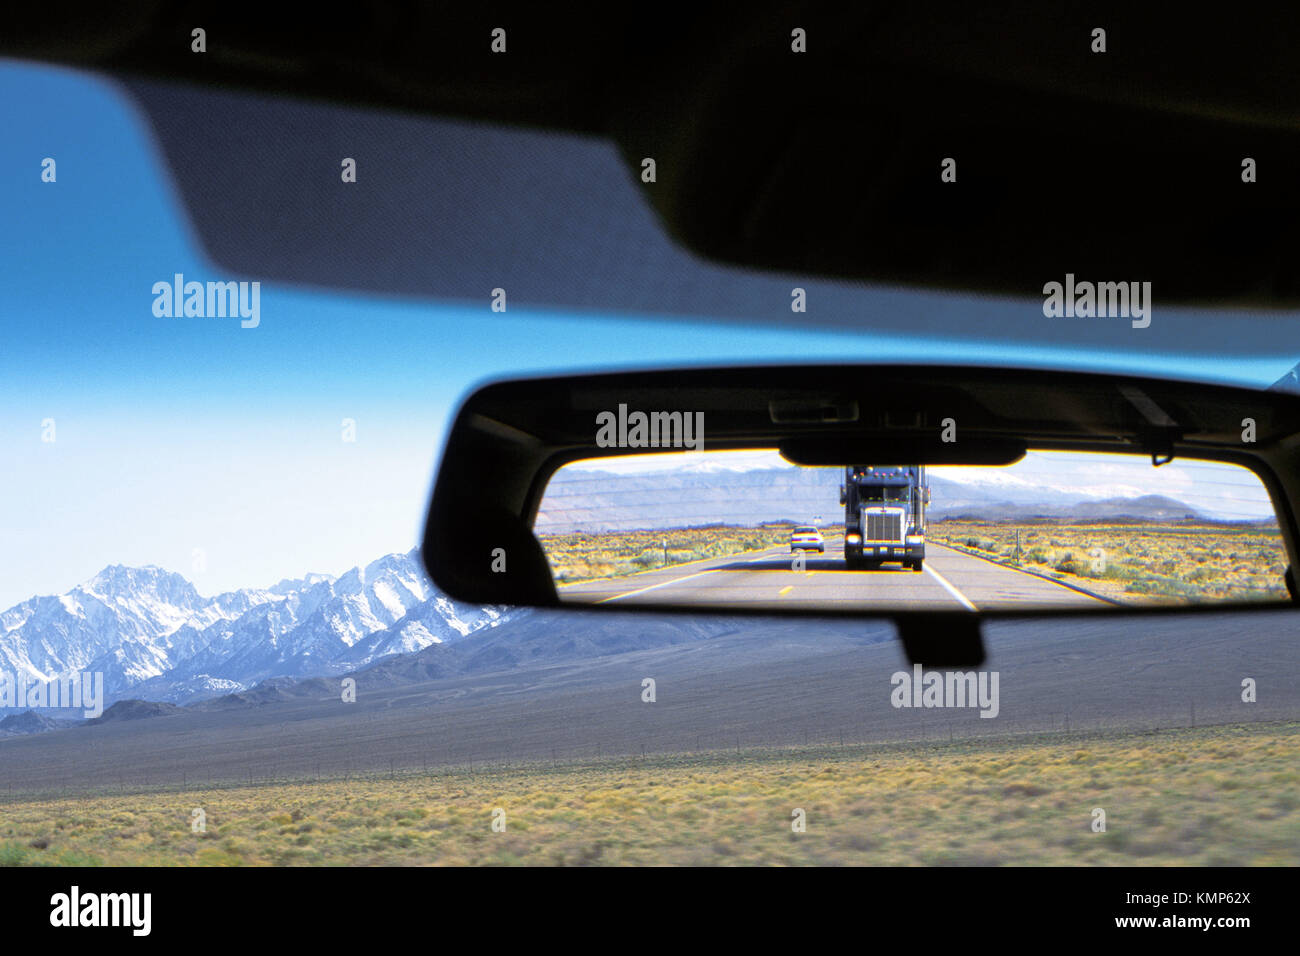 View from inside of a car with rearview mirror displaying highway